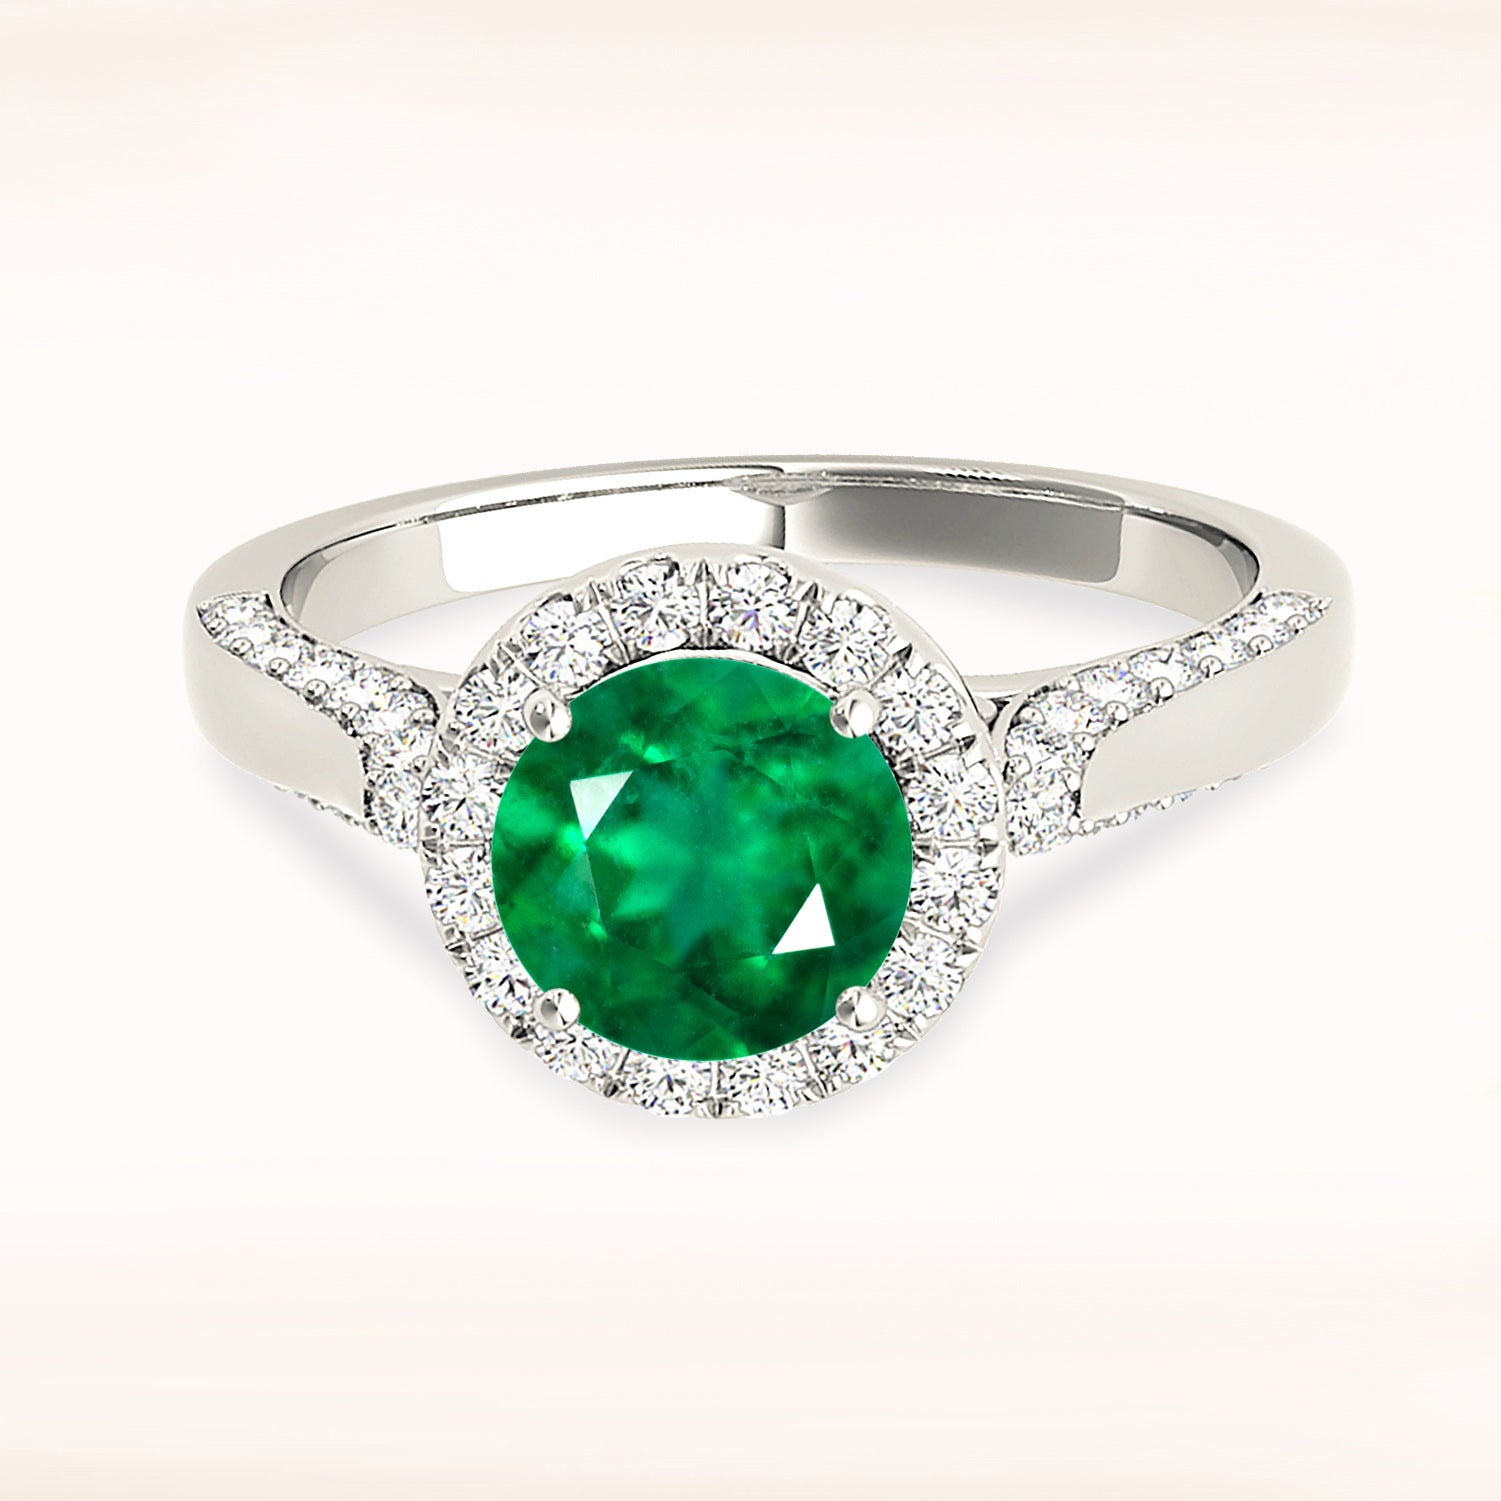 1.75 ct. Genuine Emerald Ring with 0.55 ctw. Diamond Halo, Pave Diamond and Solid Gold Band-in 14K/18K White, Yellow, Rose Gold and Platinum - Christmas Jewelry Gift -VIRABYANI